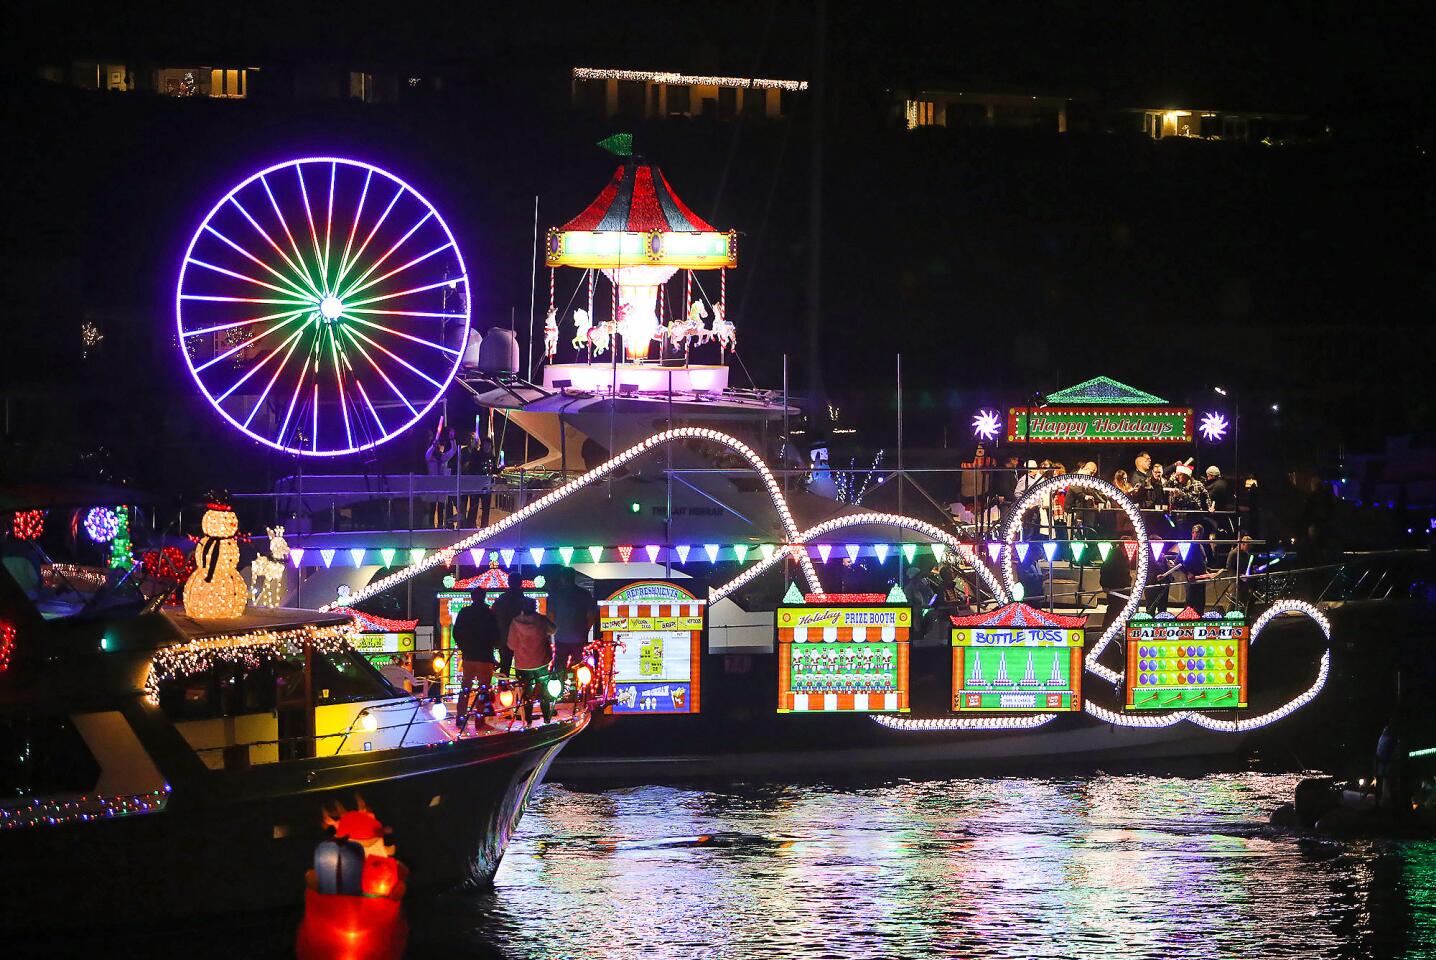 A colorful boat decorated in the theme of a circus lights up the Balboa Bridge turnaround during the 110th Newport Beach Christmas Boat Parade on Wednesday night. The parade runs nightly through Sunday, starting at about 6:30 p.m. from the southern end of Lido Isle.